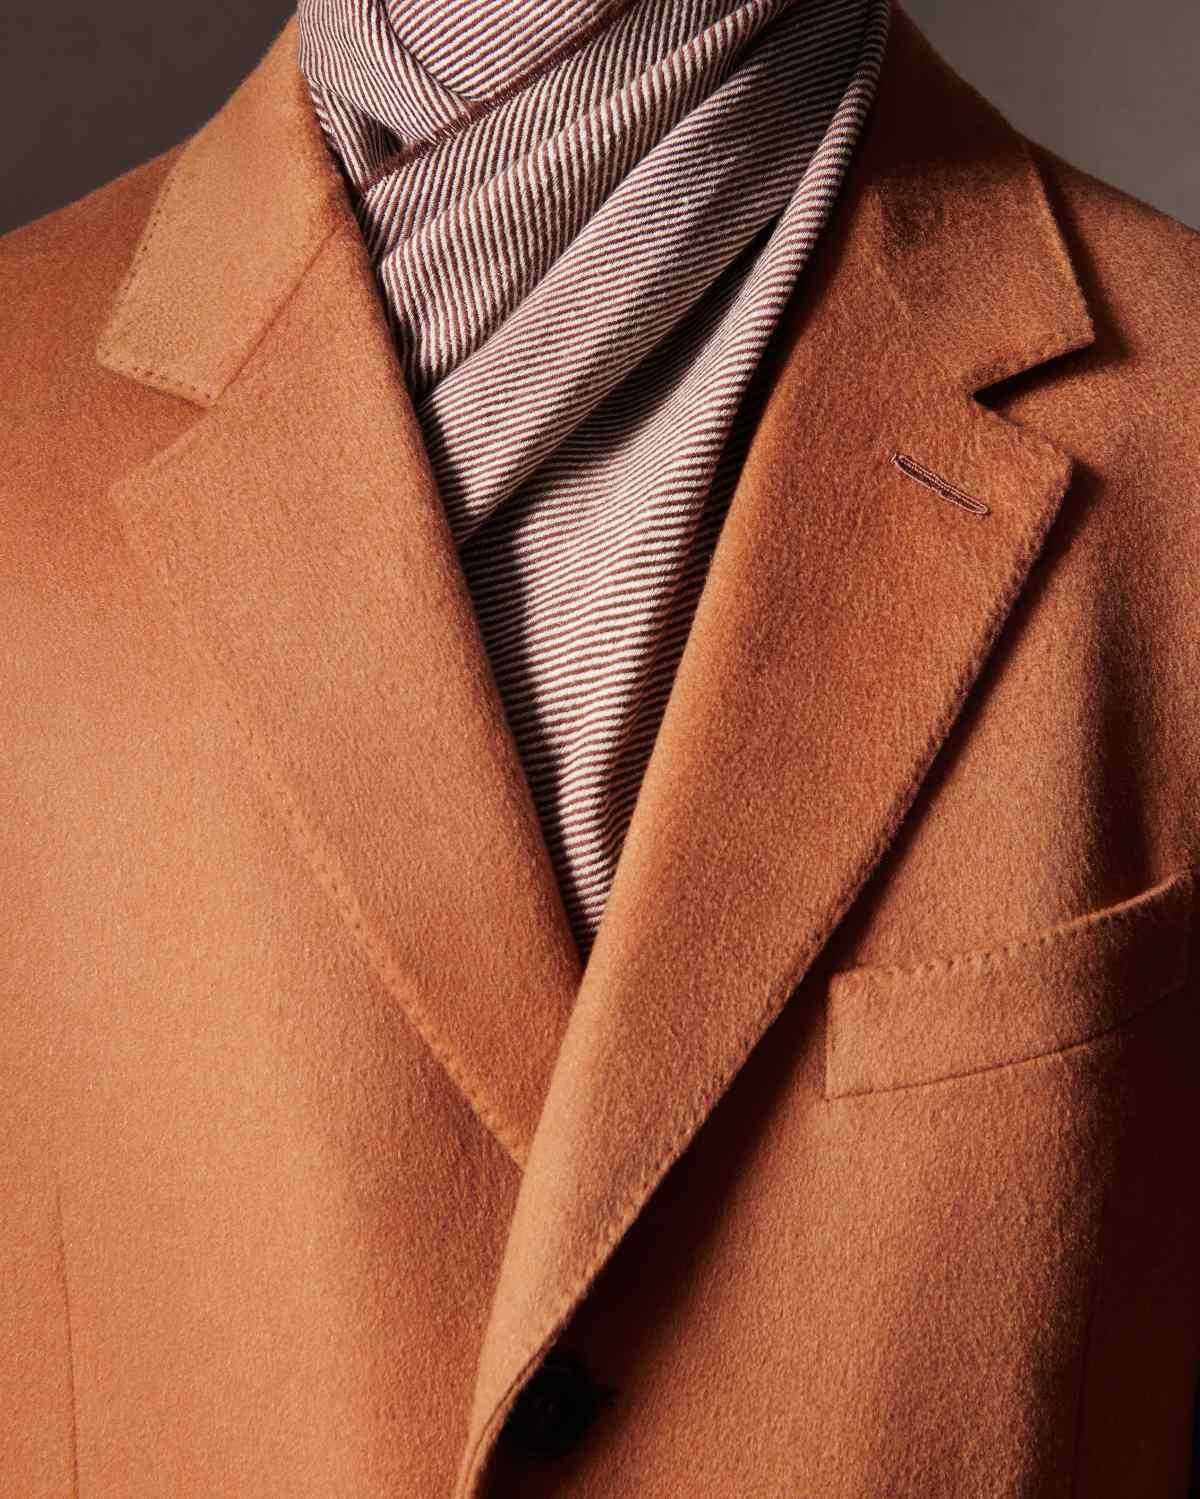 Dunhill Introduced Its New Vicuña Capsule Collection - The Pinnacle Of Refined Luxury And Craft